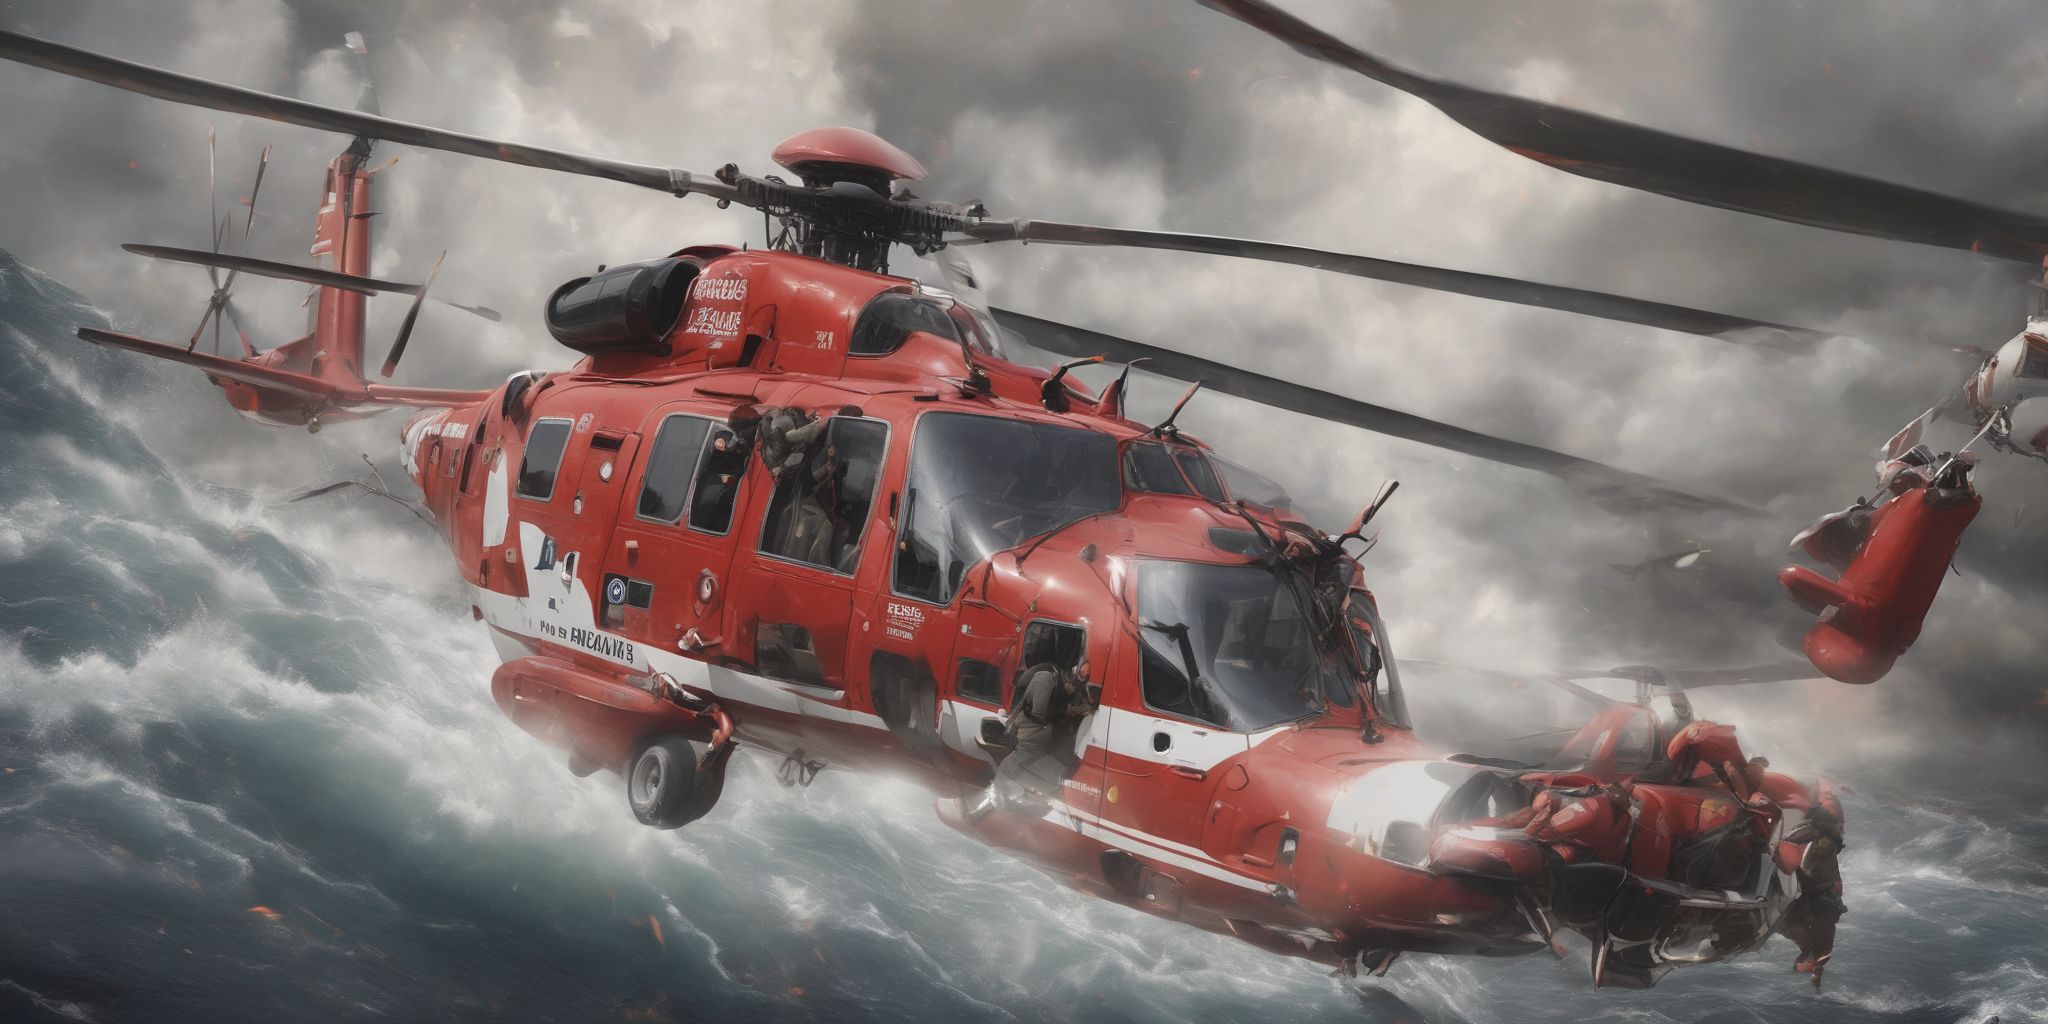 Rescue  in realistic, photographic style